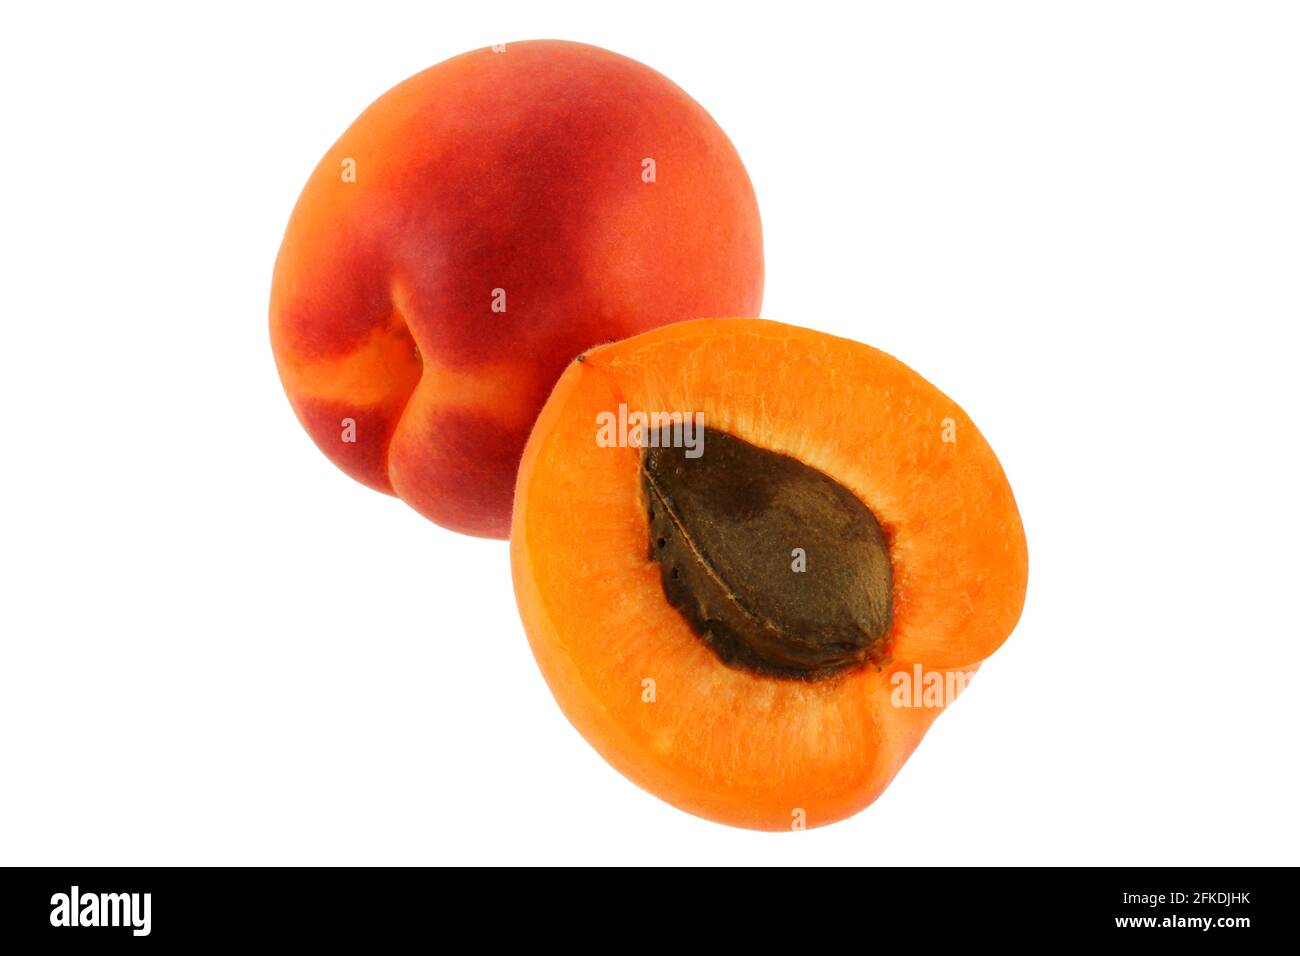 Half of fresh Nectarine with seed on a white background Stock Photo